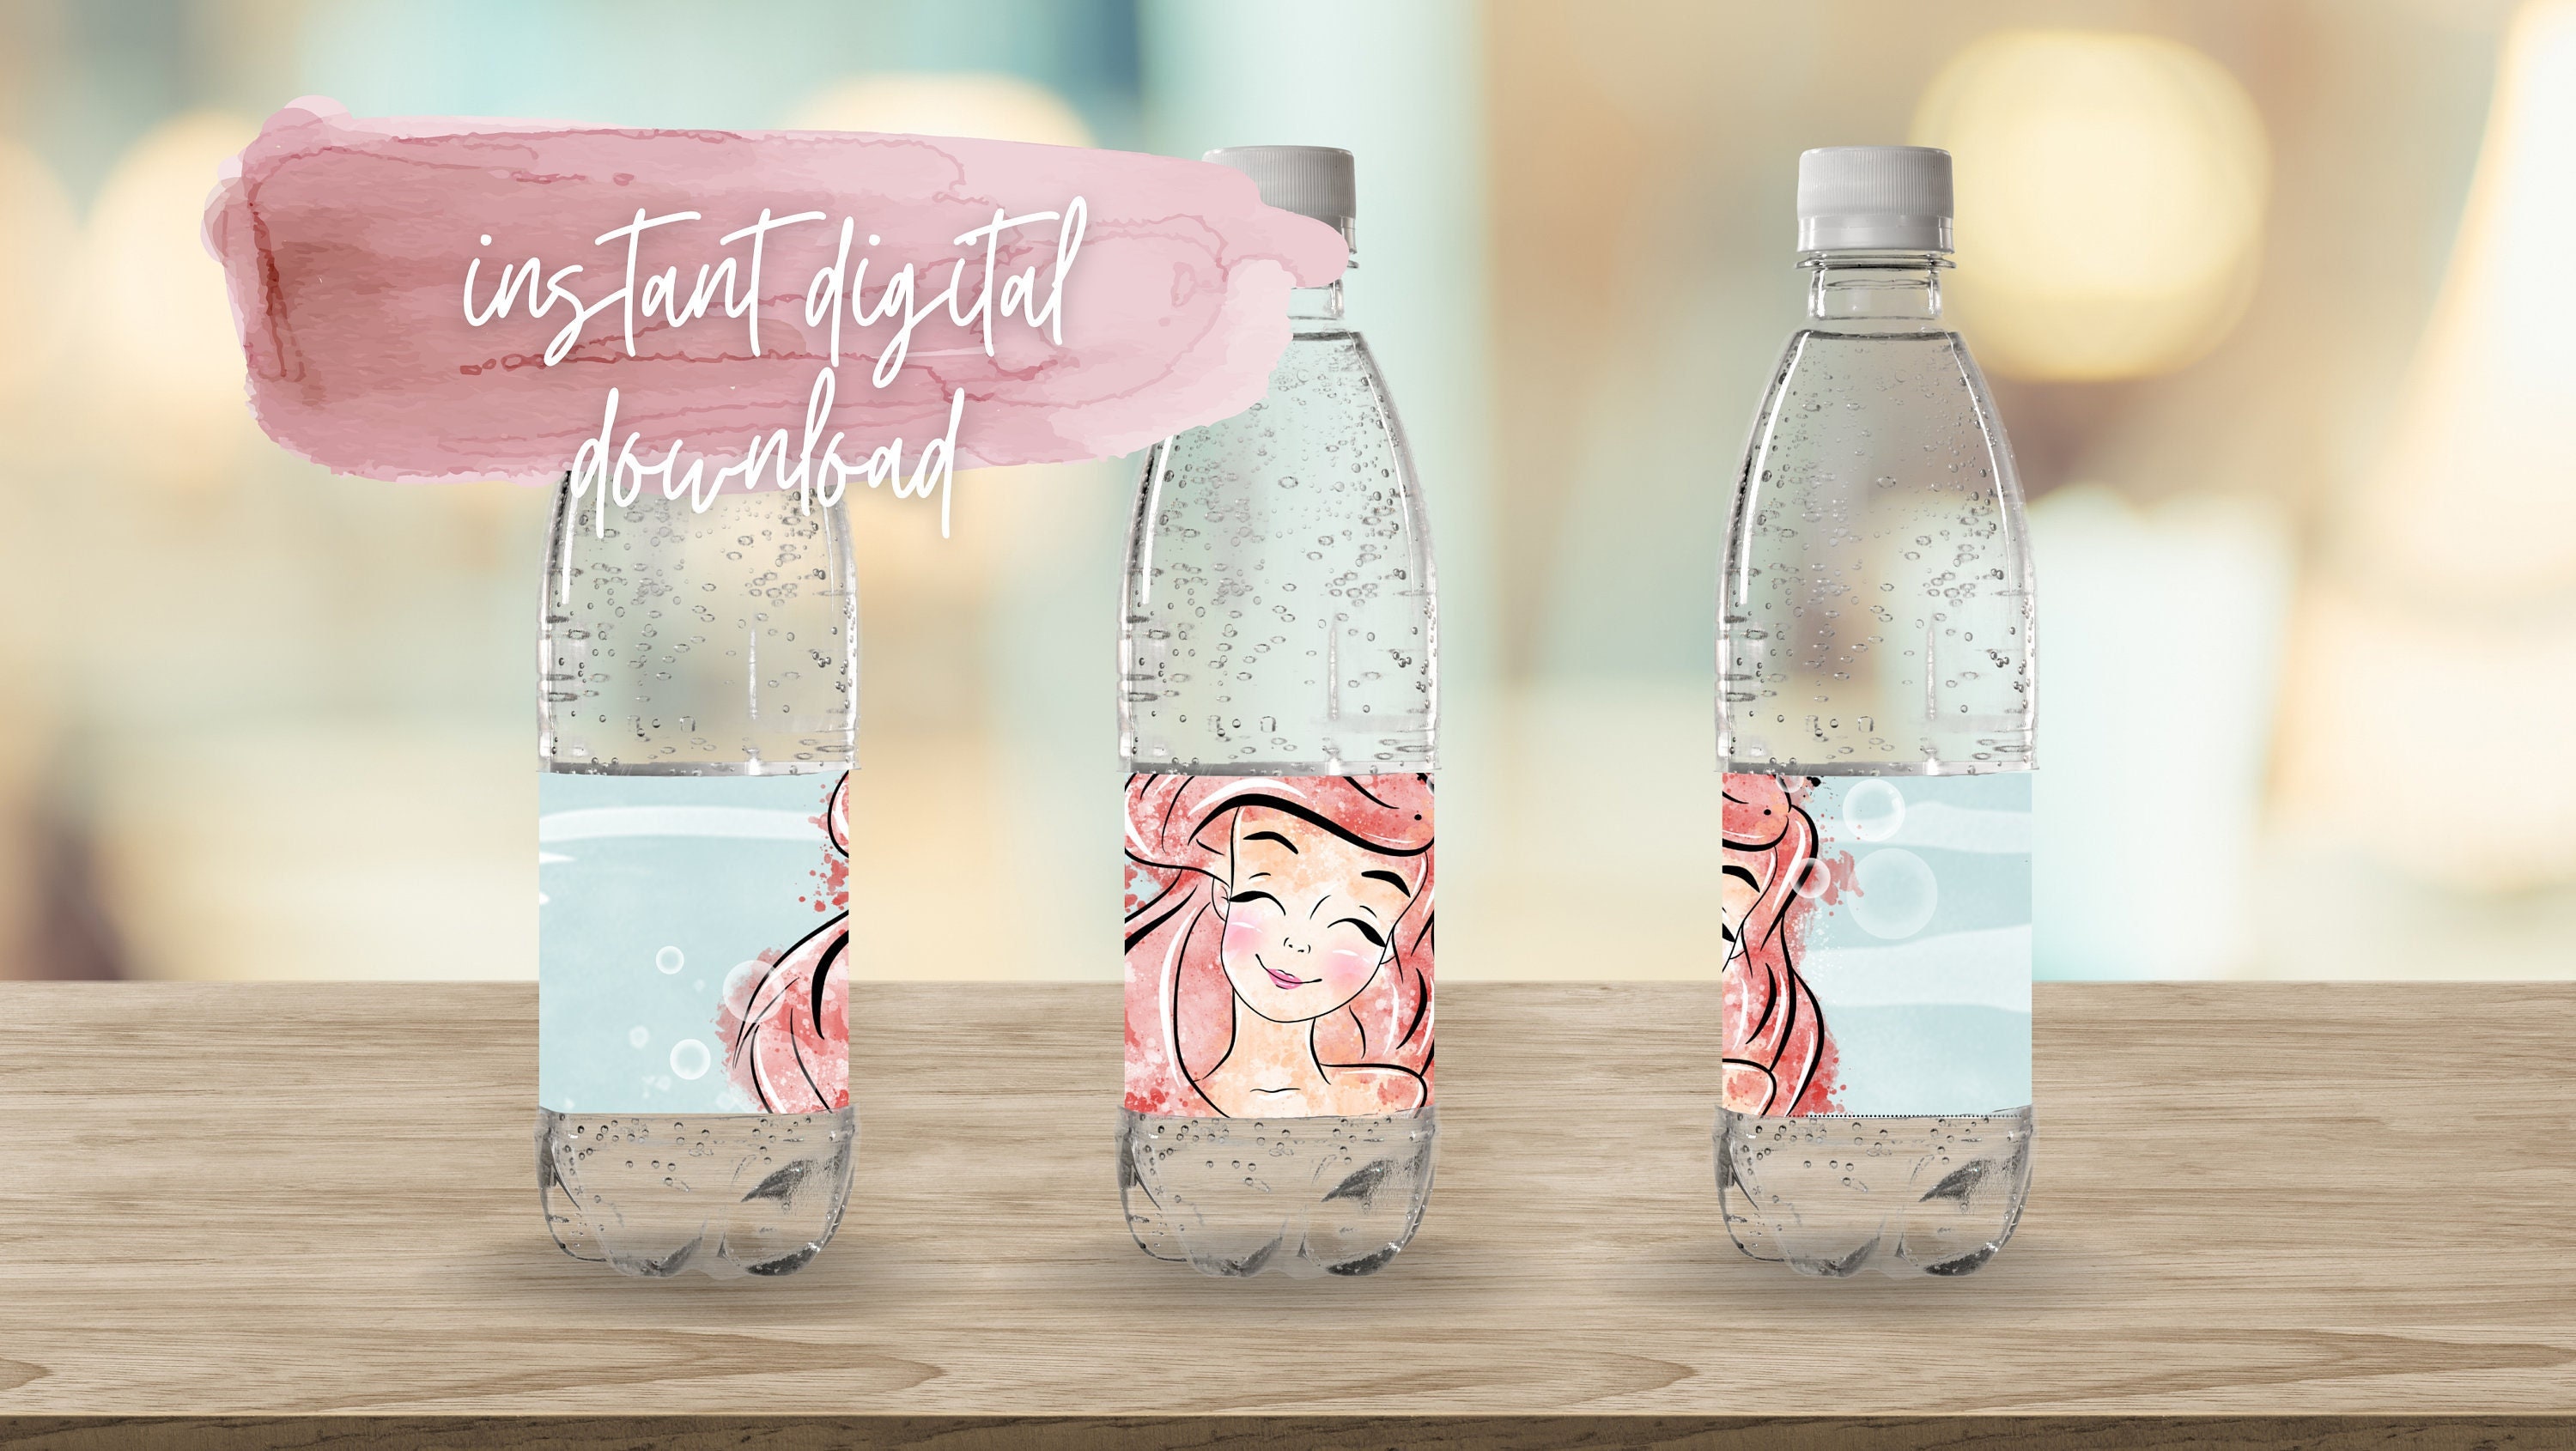 Printable Water Bottle Labels, Baby Shower Diva Royal African Princess  Girl Peach Gold Drink Wrappers, Instant Download by Printable-Party.com